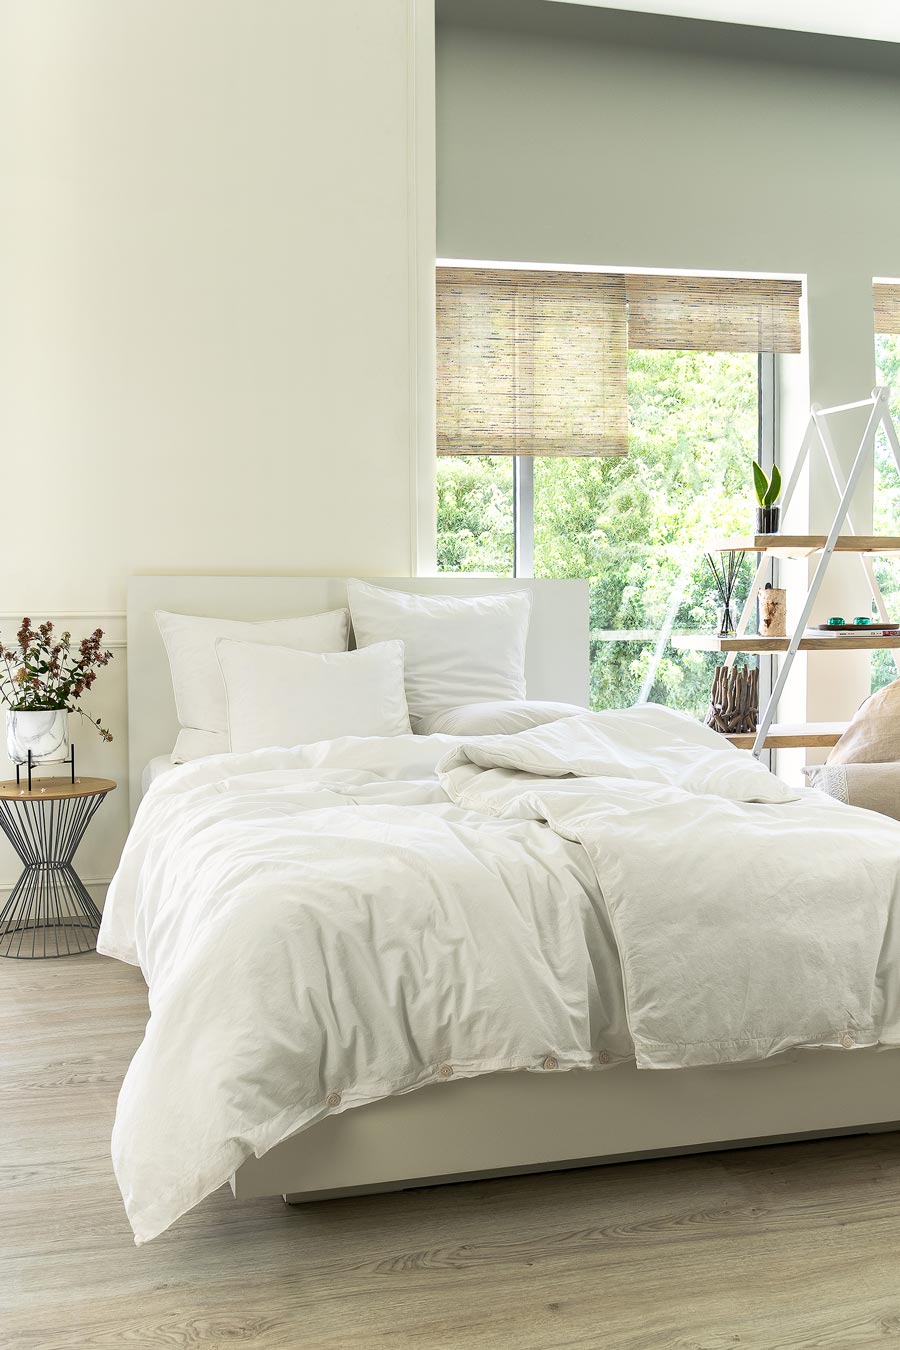 Bed with white Organic Cotton Percale bedding next to a shelf and bedside table with plants.